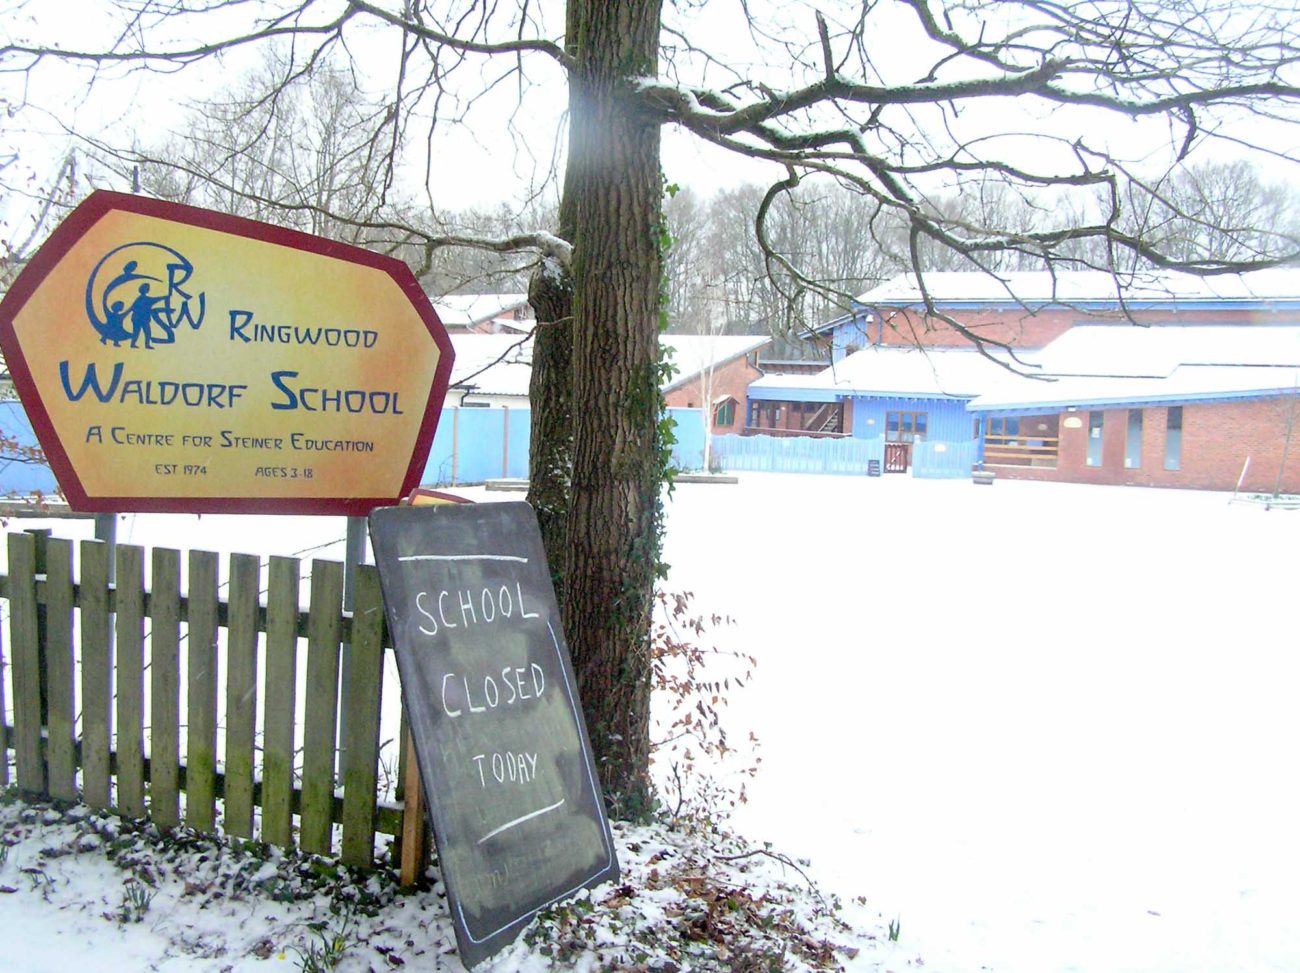 Snow covers Ringwood Waldorf School grounds